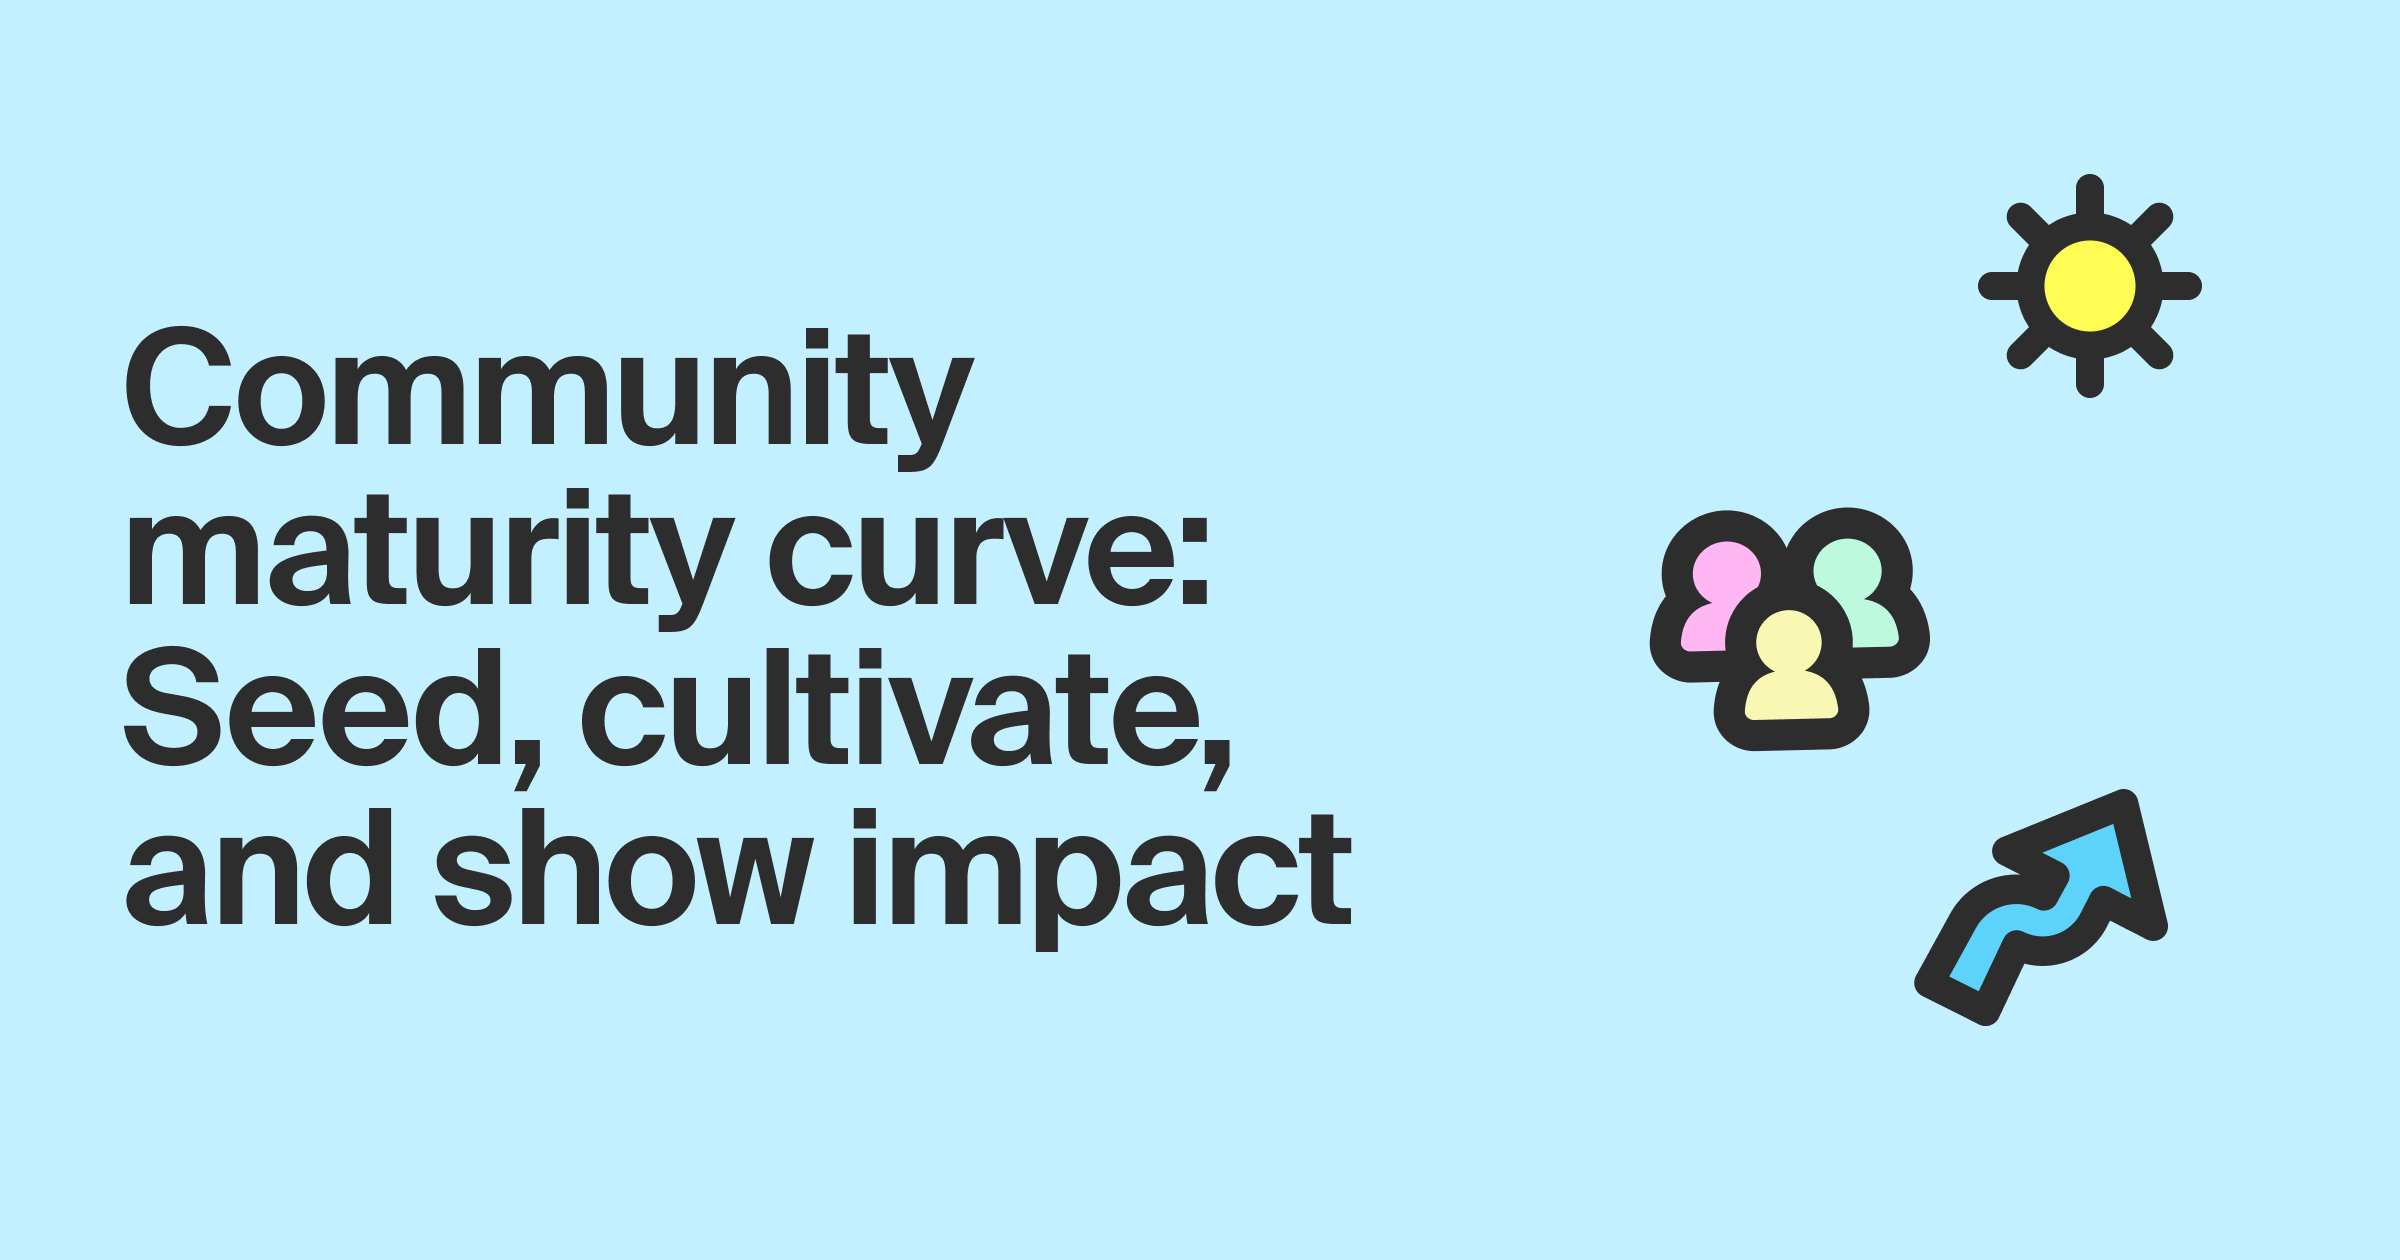 Community maturity curve: Seed, cultivate, and show impact